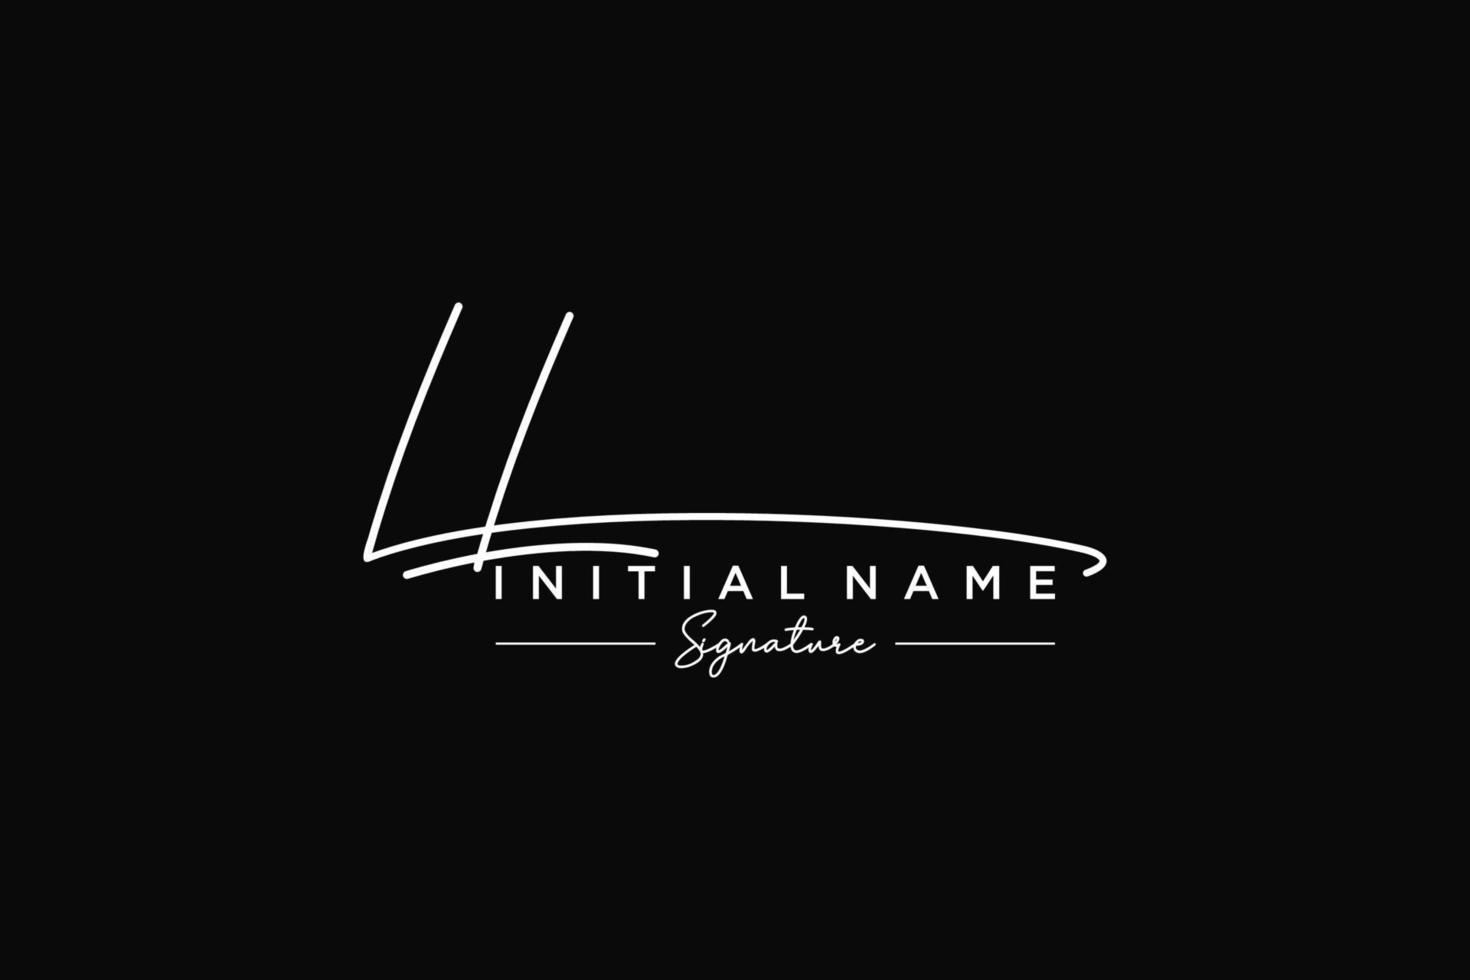 Initial LL signature logo template vector. Hand drawn Calligraphy lettering Vector illustration.